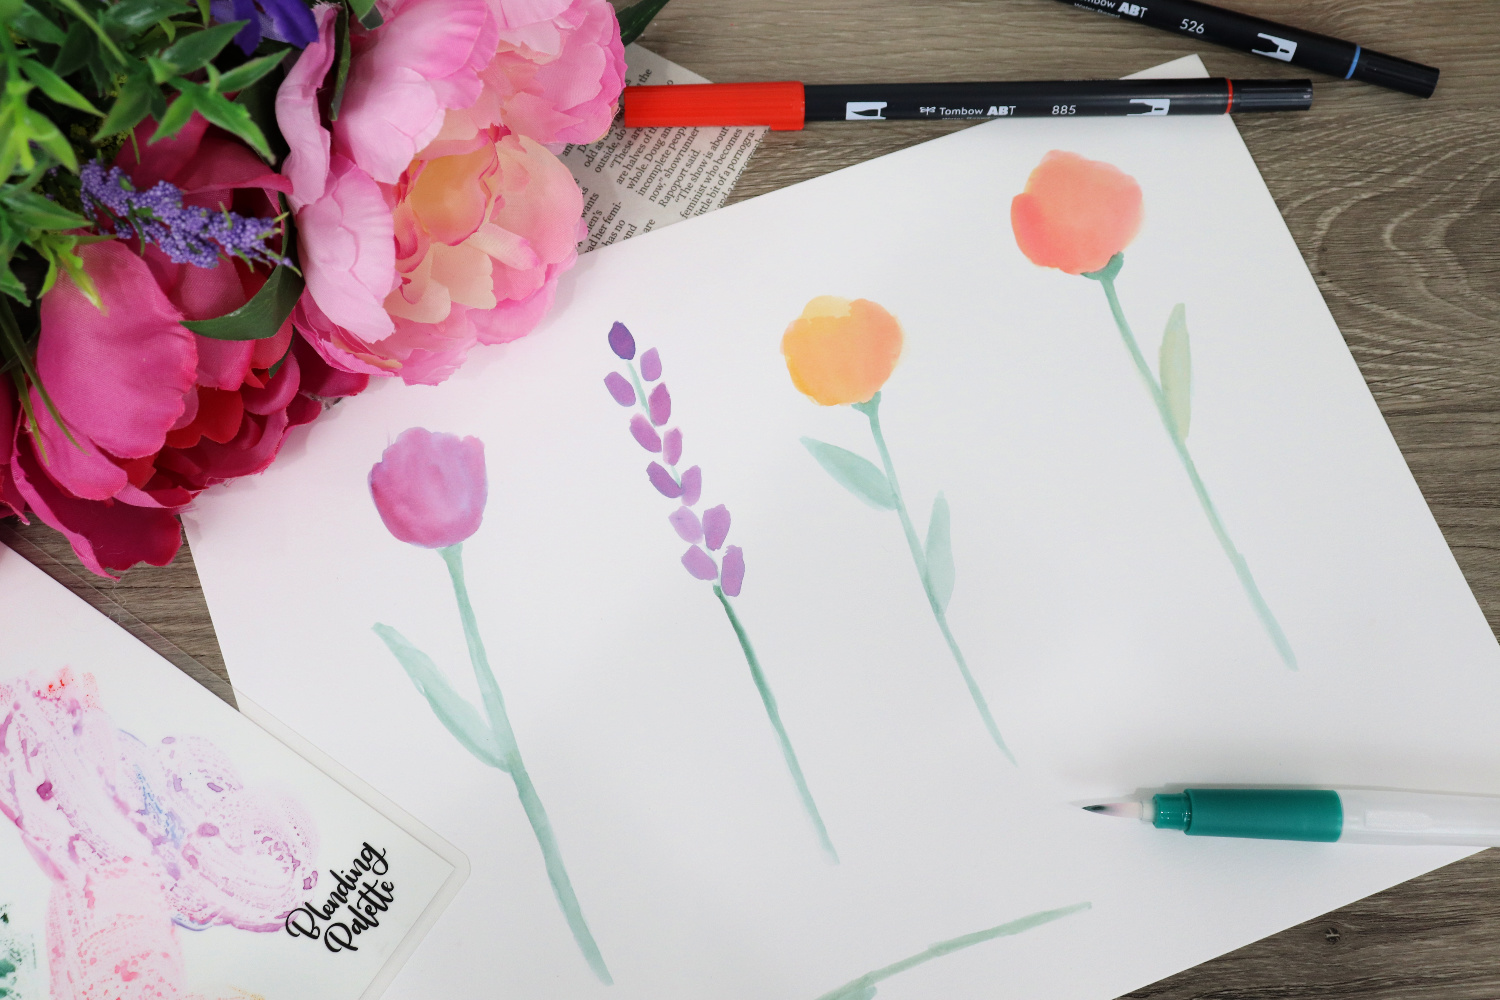 Image contains a piece of white Bristol Board that has four different flower shapes watercolored on it. Two Dual Brush Pens and a Water Pen sit nearby, along with a blending palette, faux flowers, and a newspaper clipping.